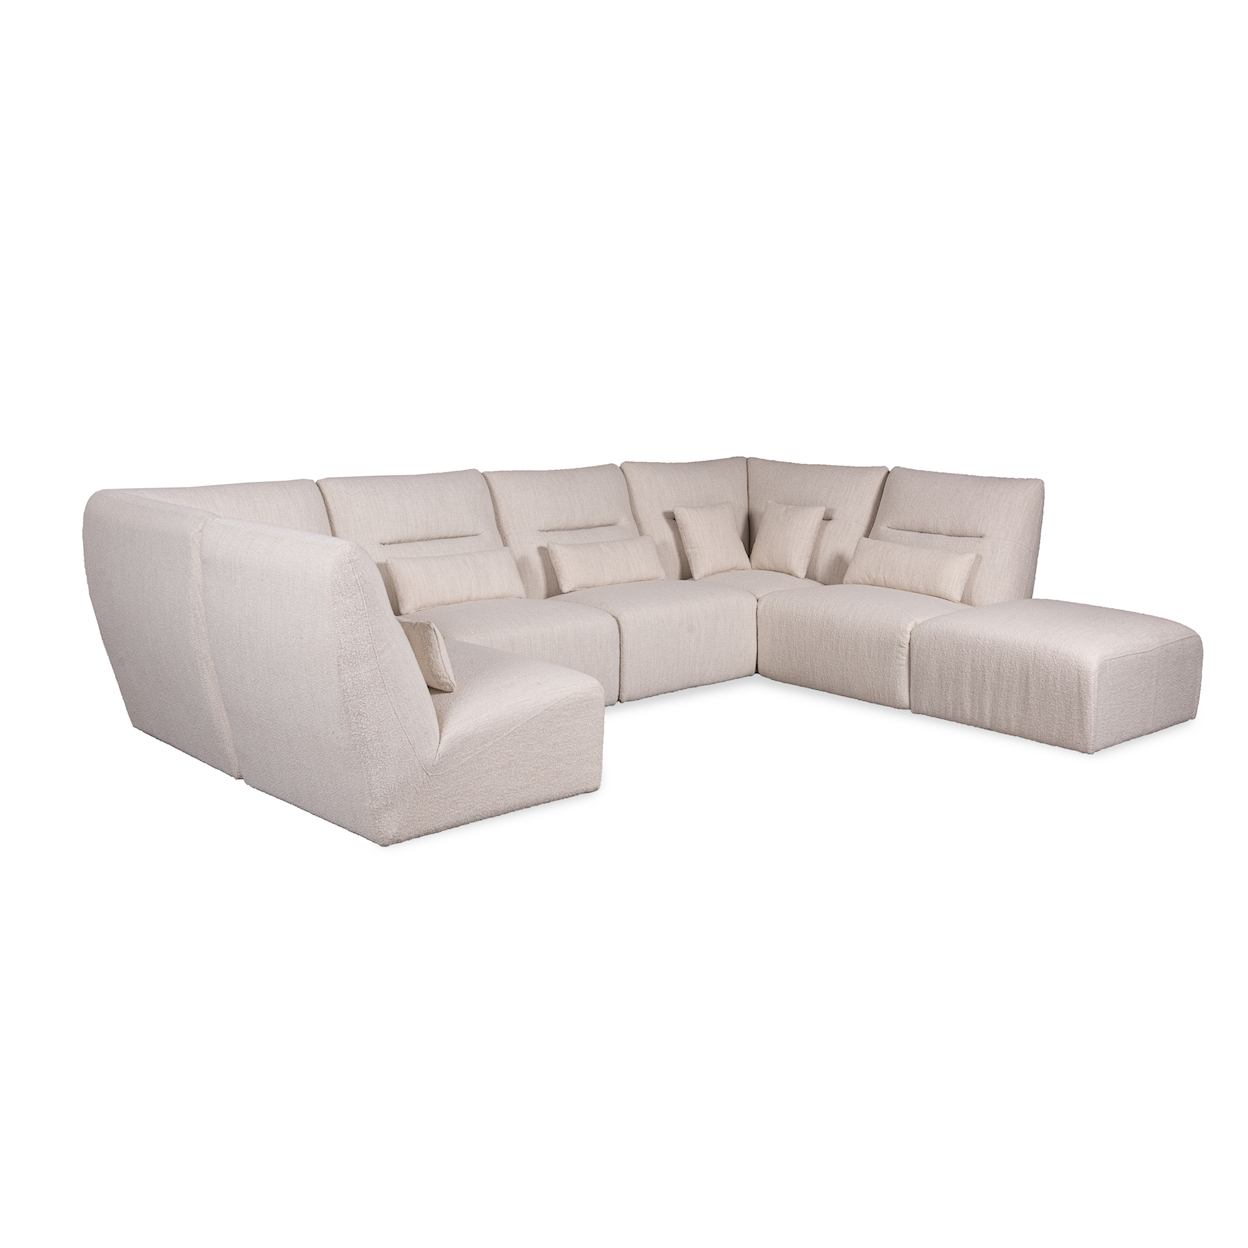 Synergy Home Furnishings 5047 6-Piece Sectional 